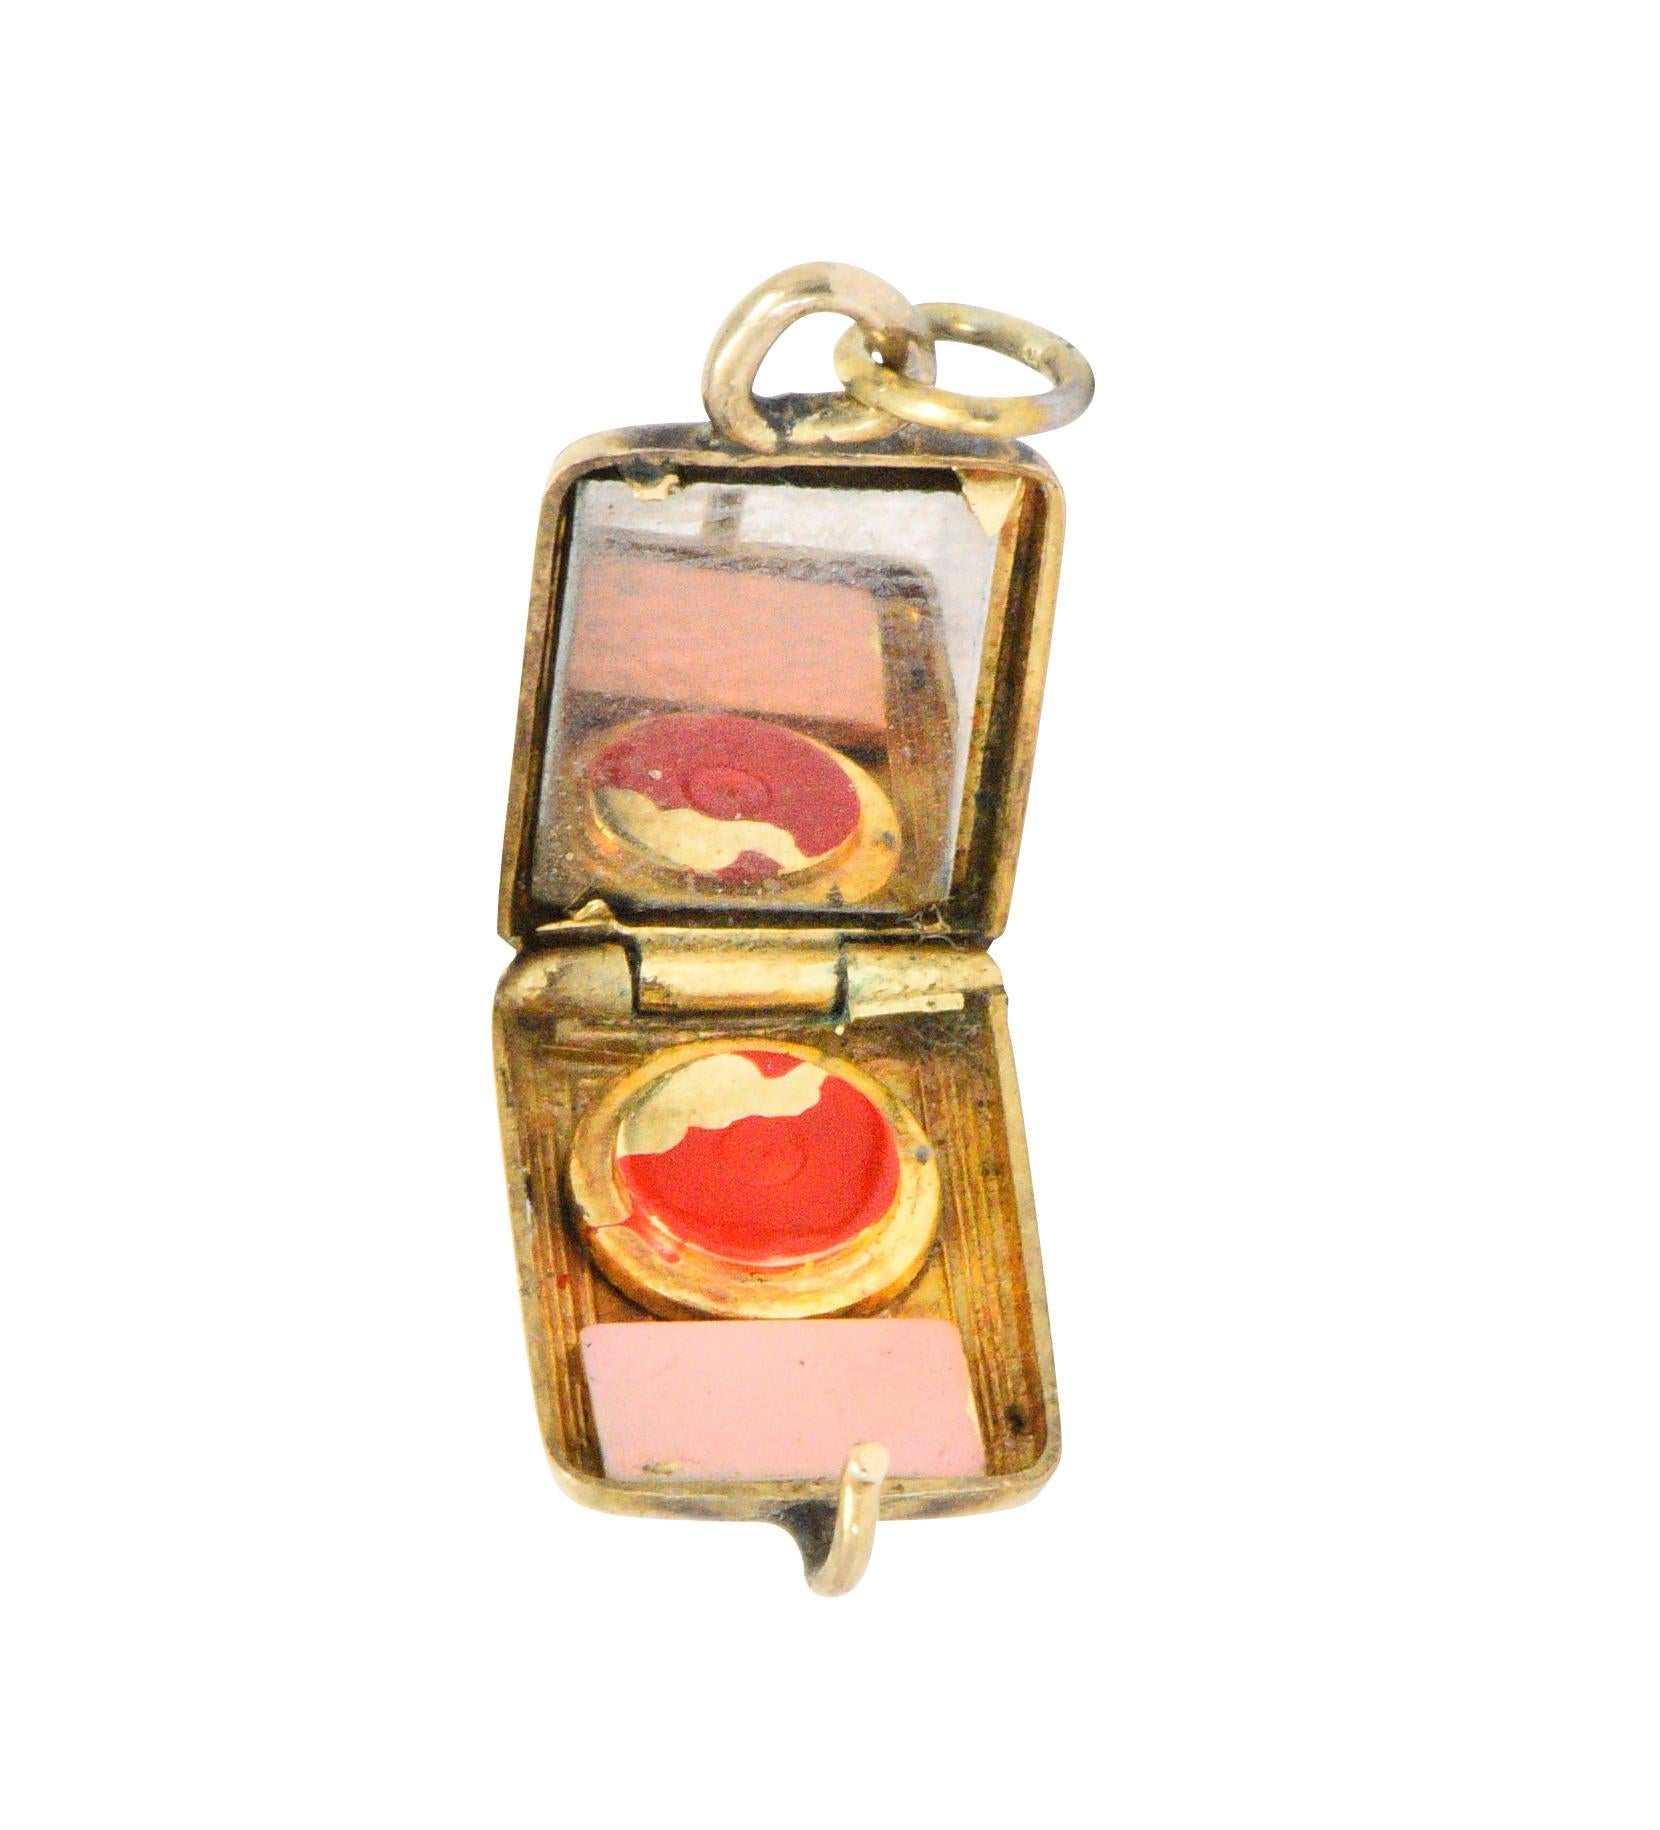 Designed as a cushion shaped makeup compact with deeply engraved striations

Opens on a hinge to reveal a mirror, a pink enamel puff, and red enamel rouge 

Exhibits loss; consistent with age, wear, and use

Completed by a jump ring bale

Stamped